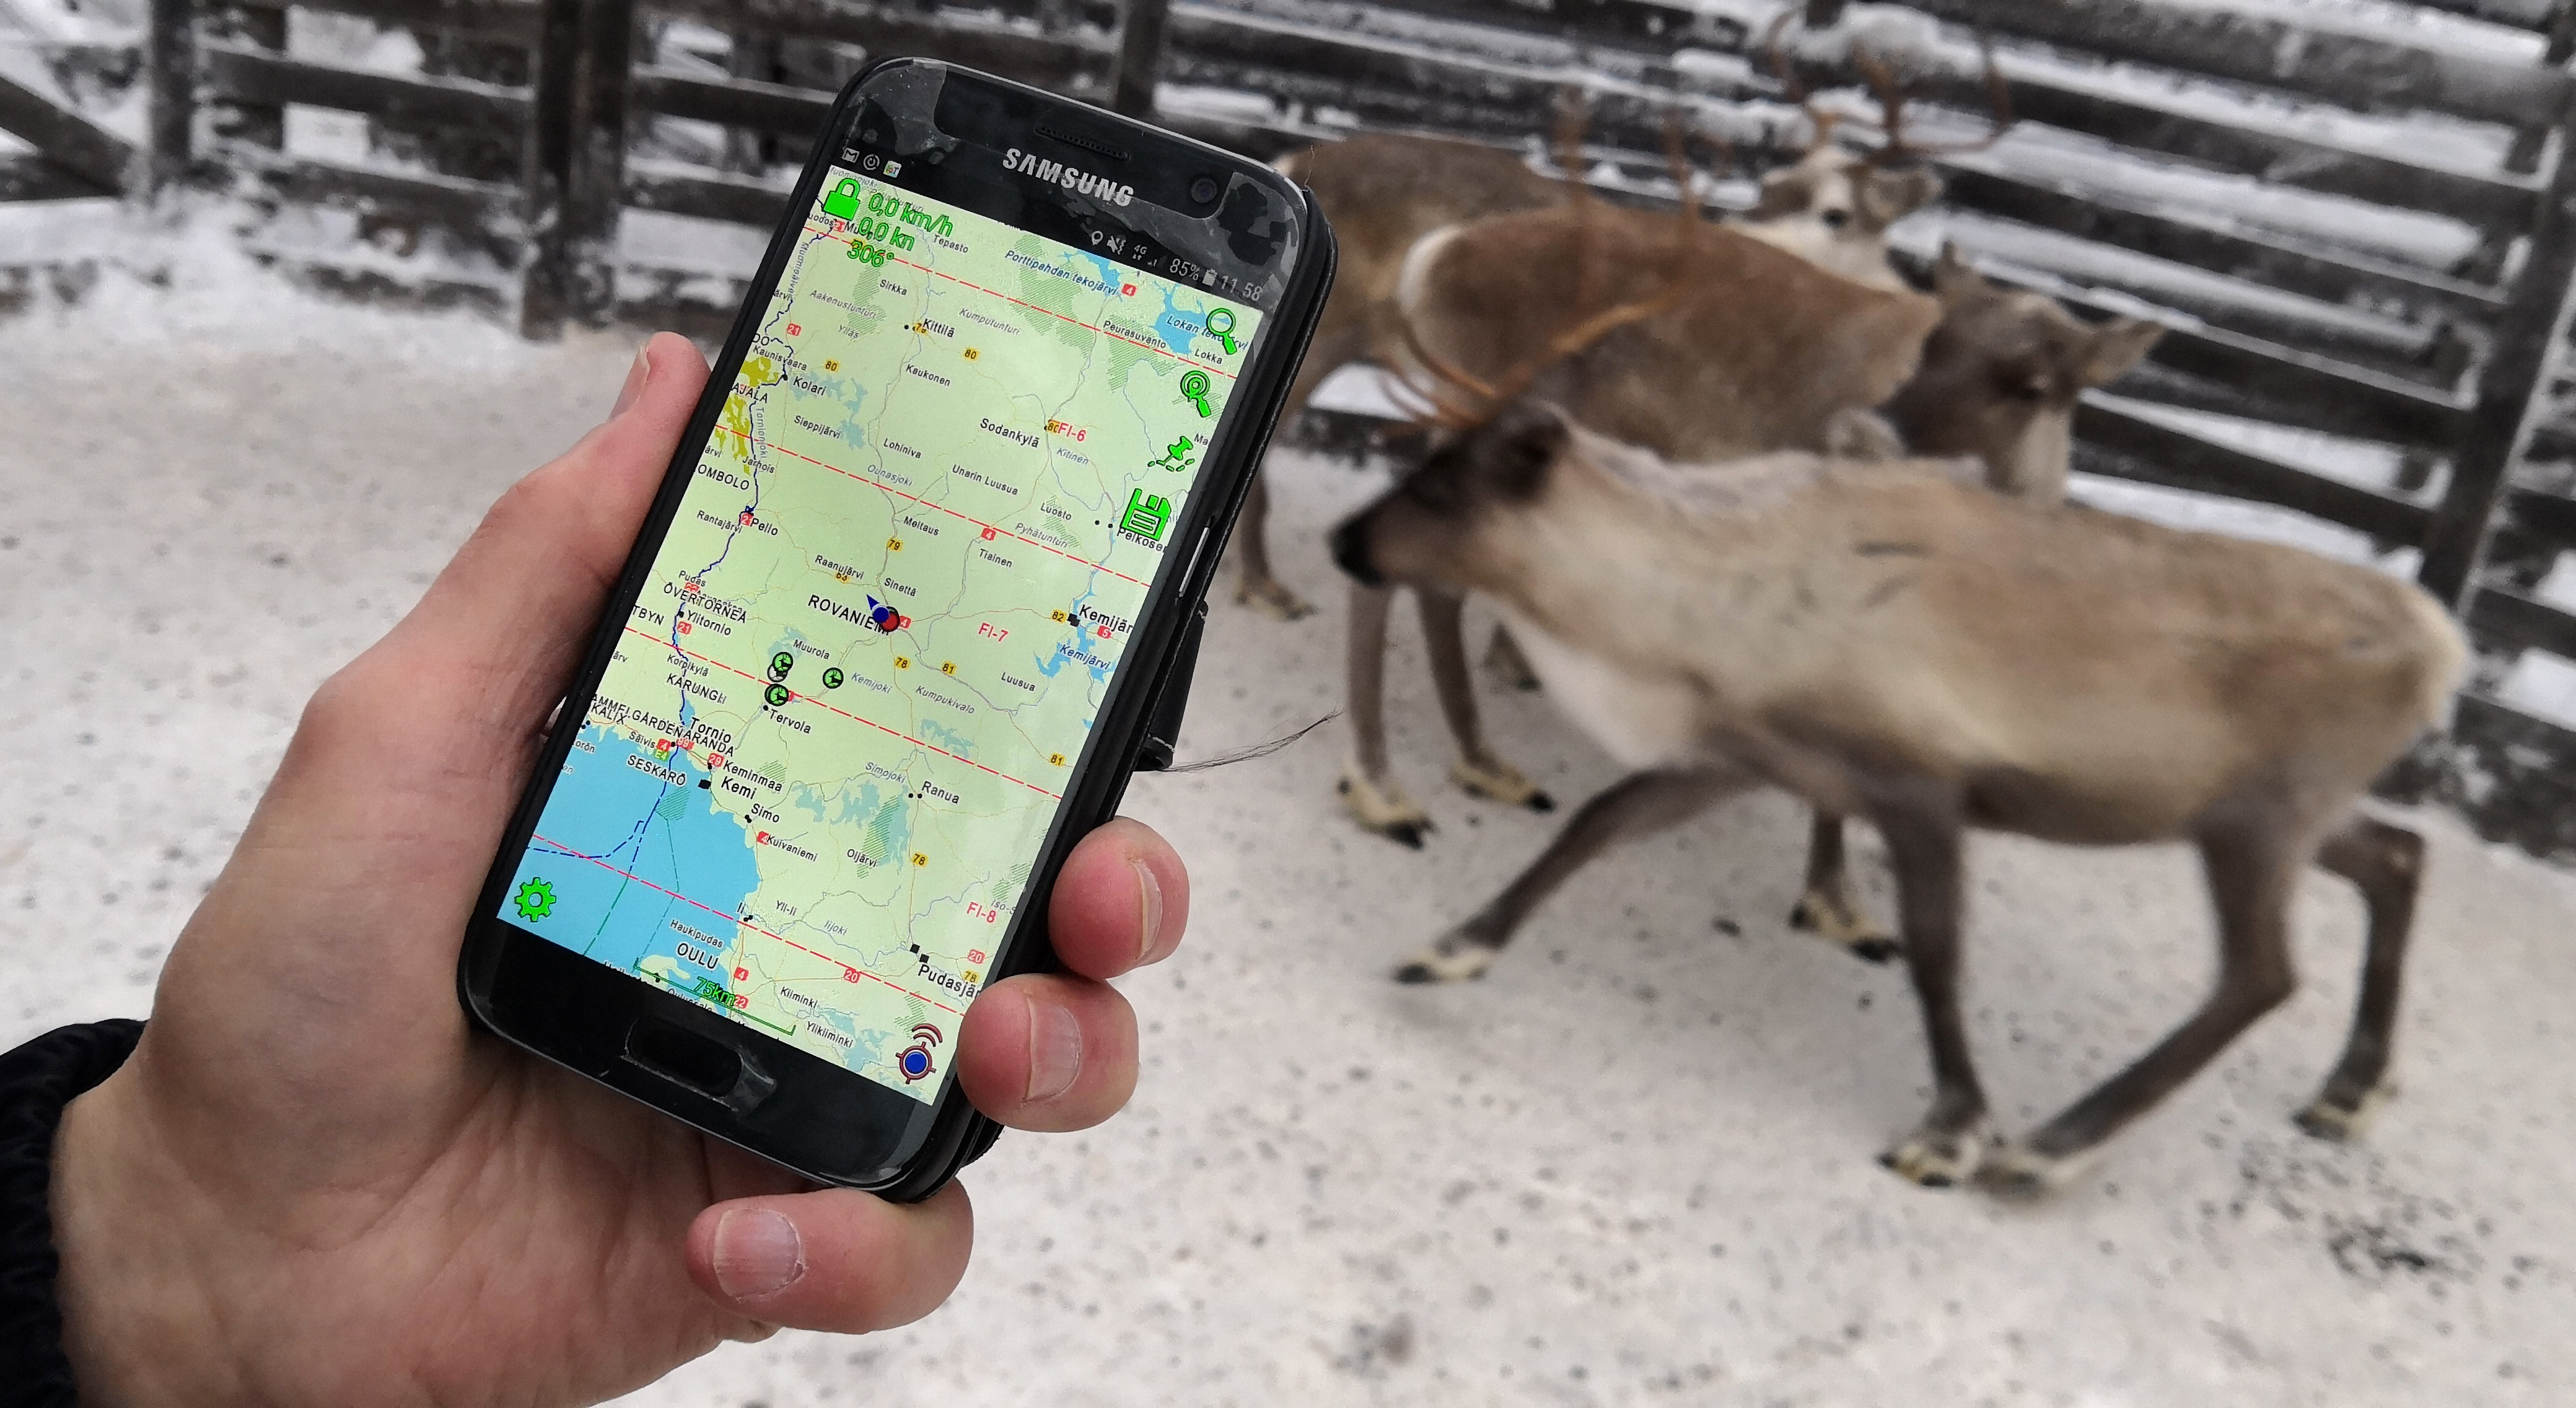 jammer legal forms arizona - Then One Foggy Christmas Eve, Reindeers Got Connected